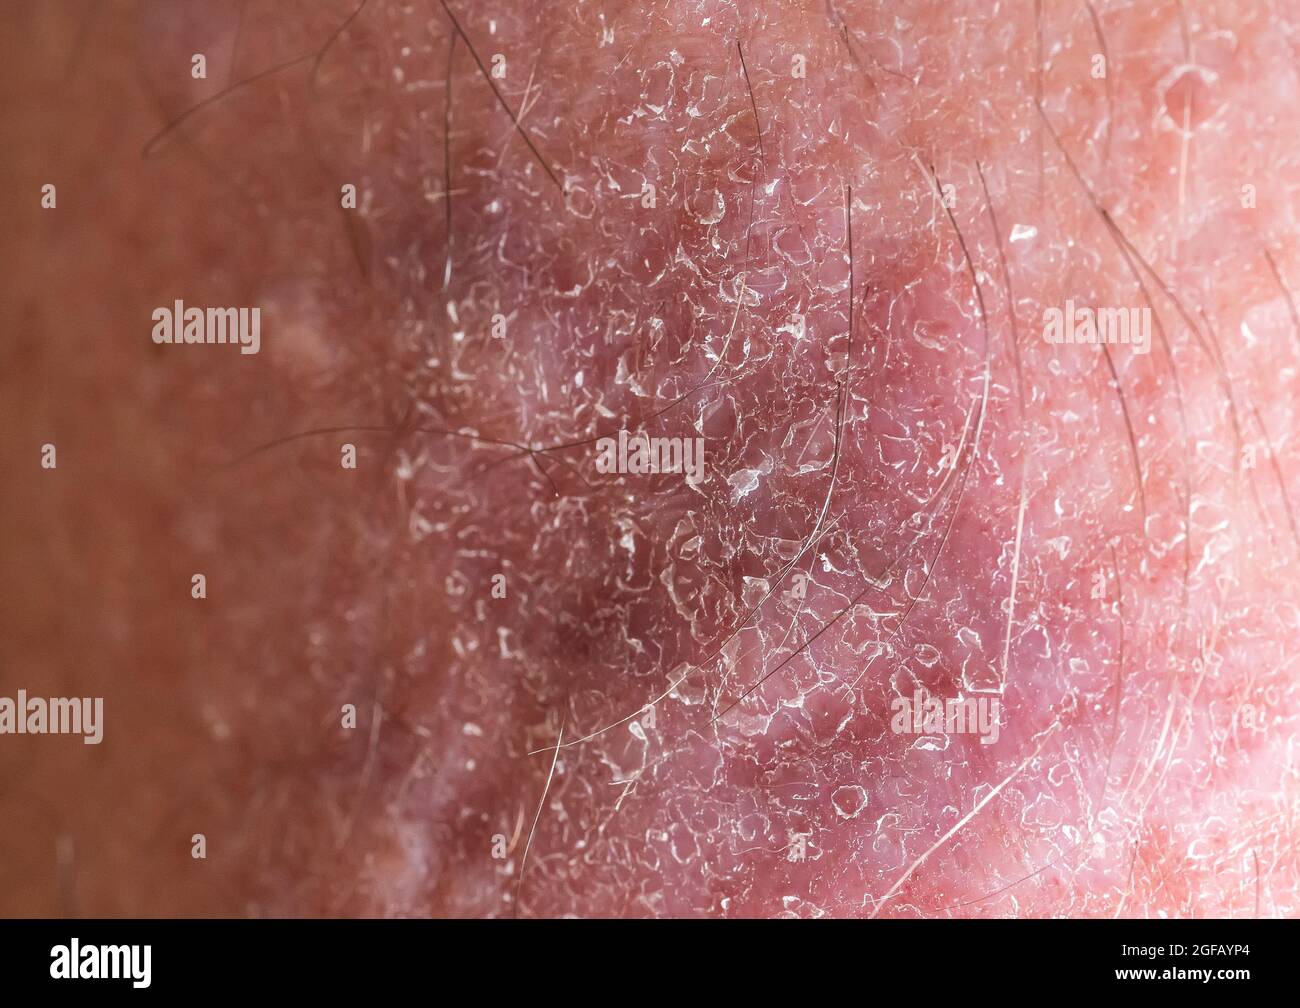 Close-up of bumpy skin with blemishes and scaly epidermis, dermatology and skin diseases. Stock Photo